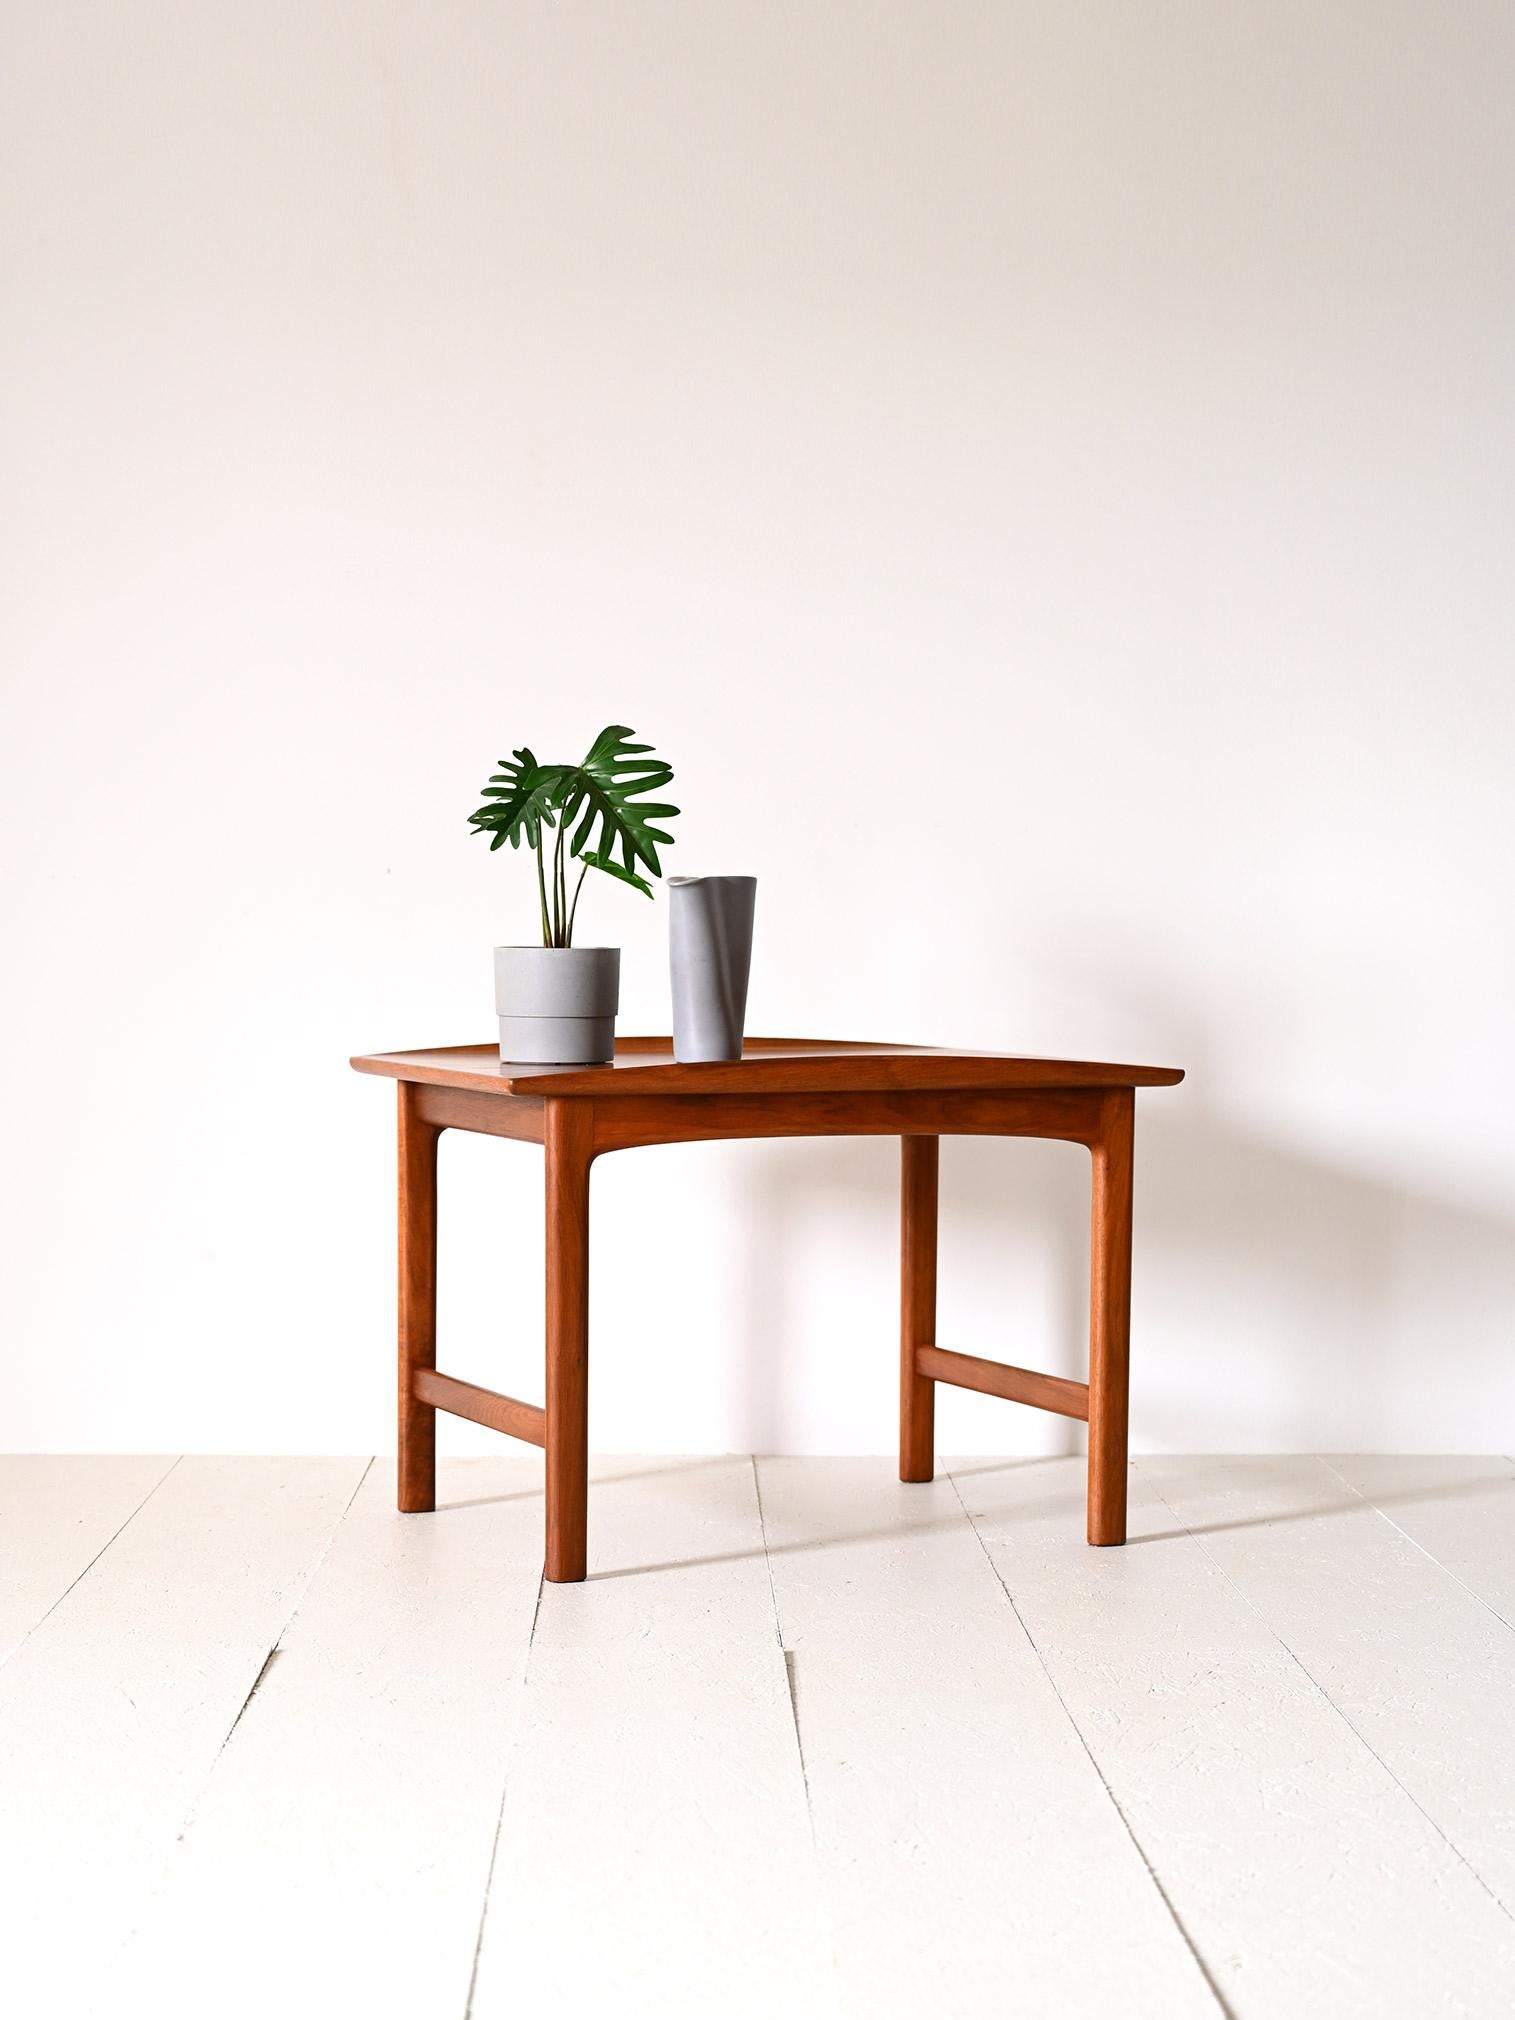 Teak sofa table manufactured by the Swedish company Tingströms.

This piece of Scandinavian design was awarded the Gold Medal at the 1960 California Fair. 
